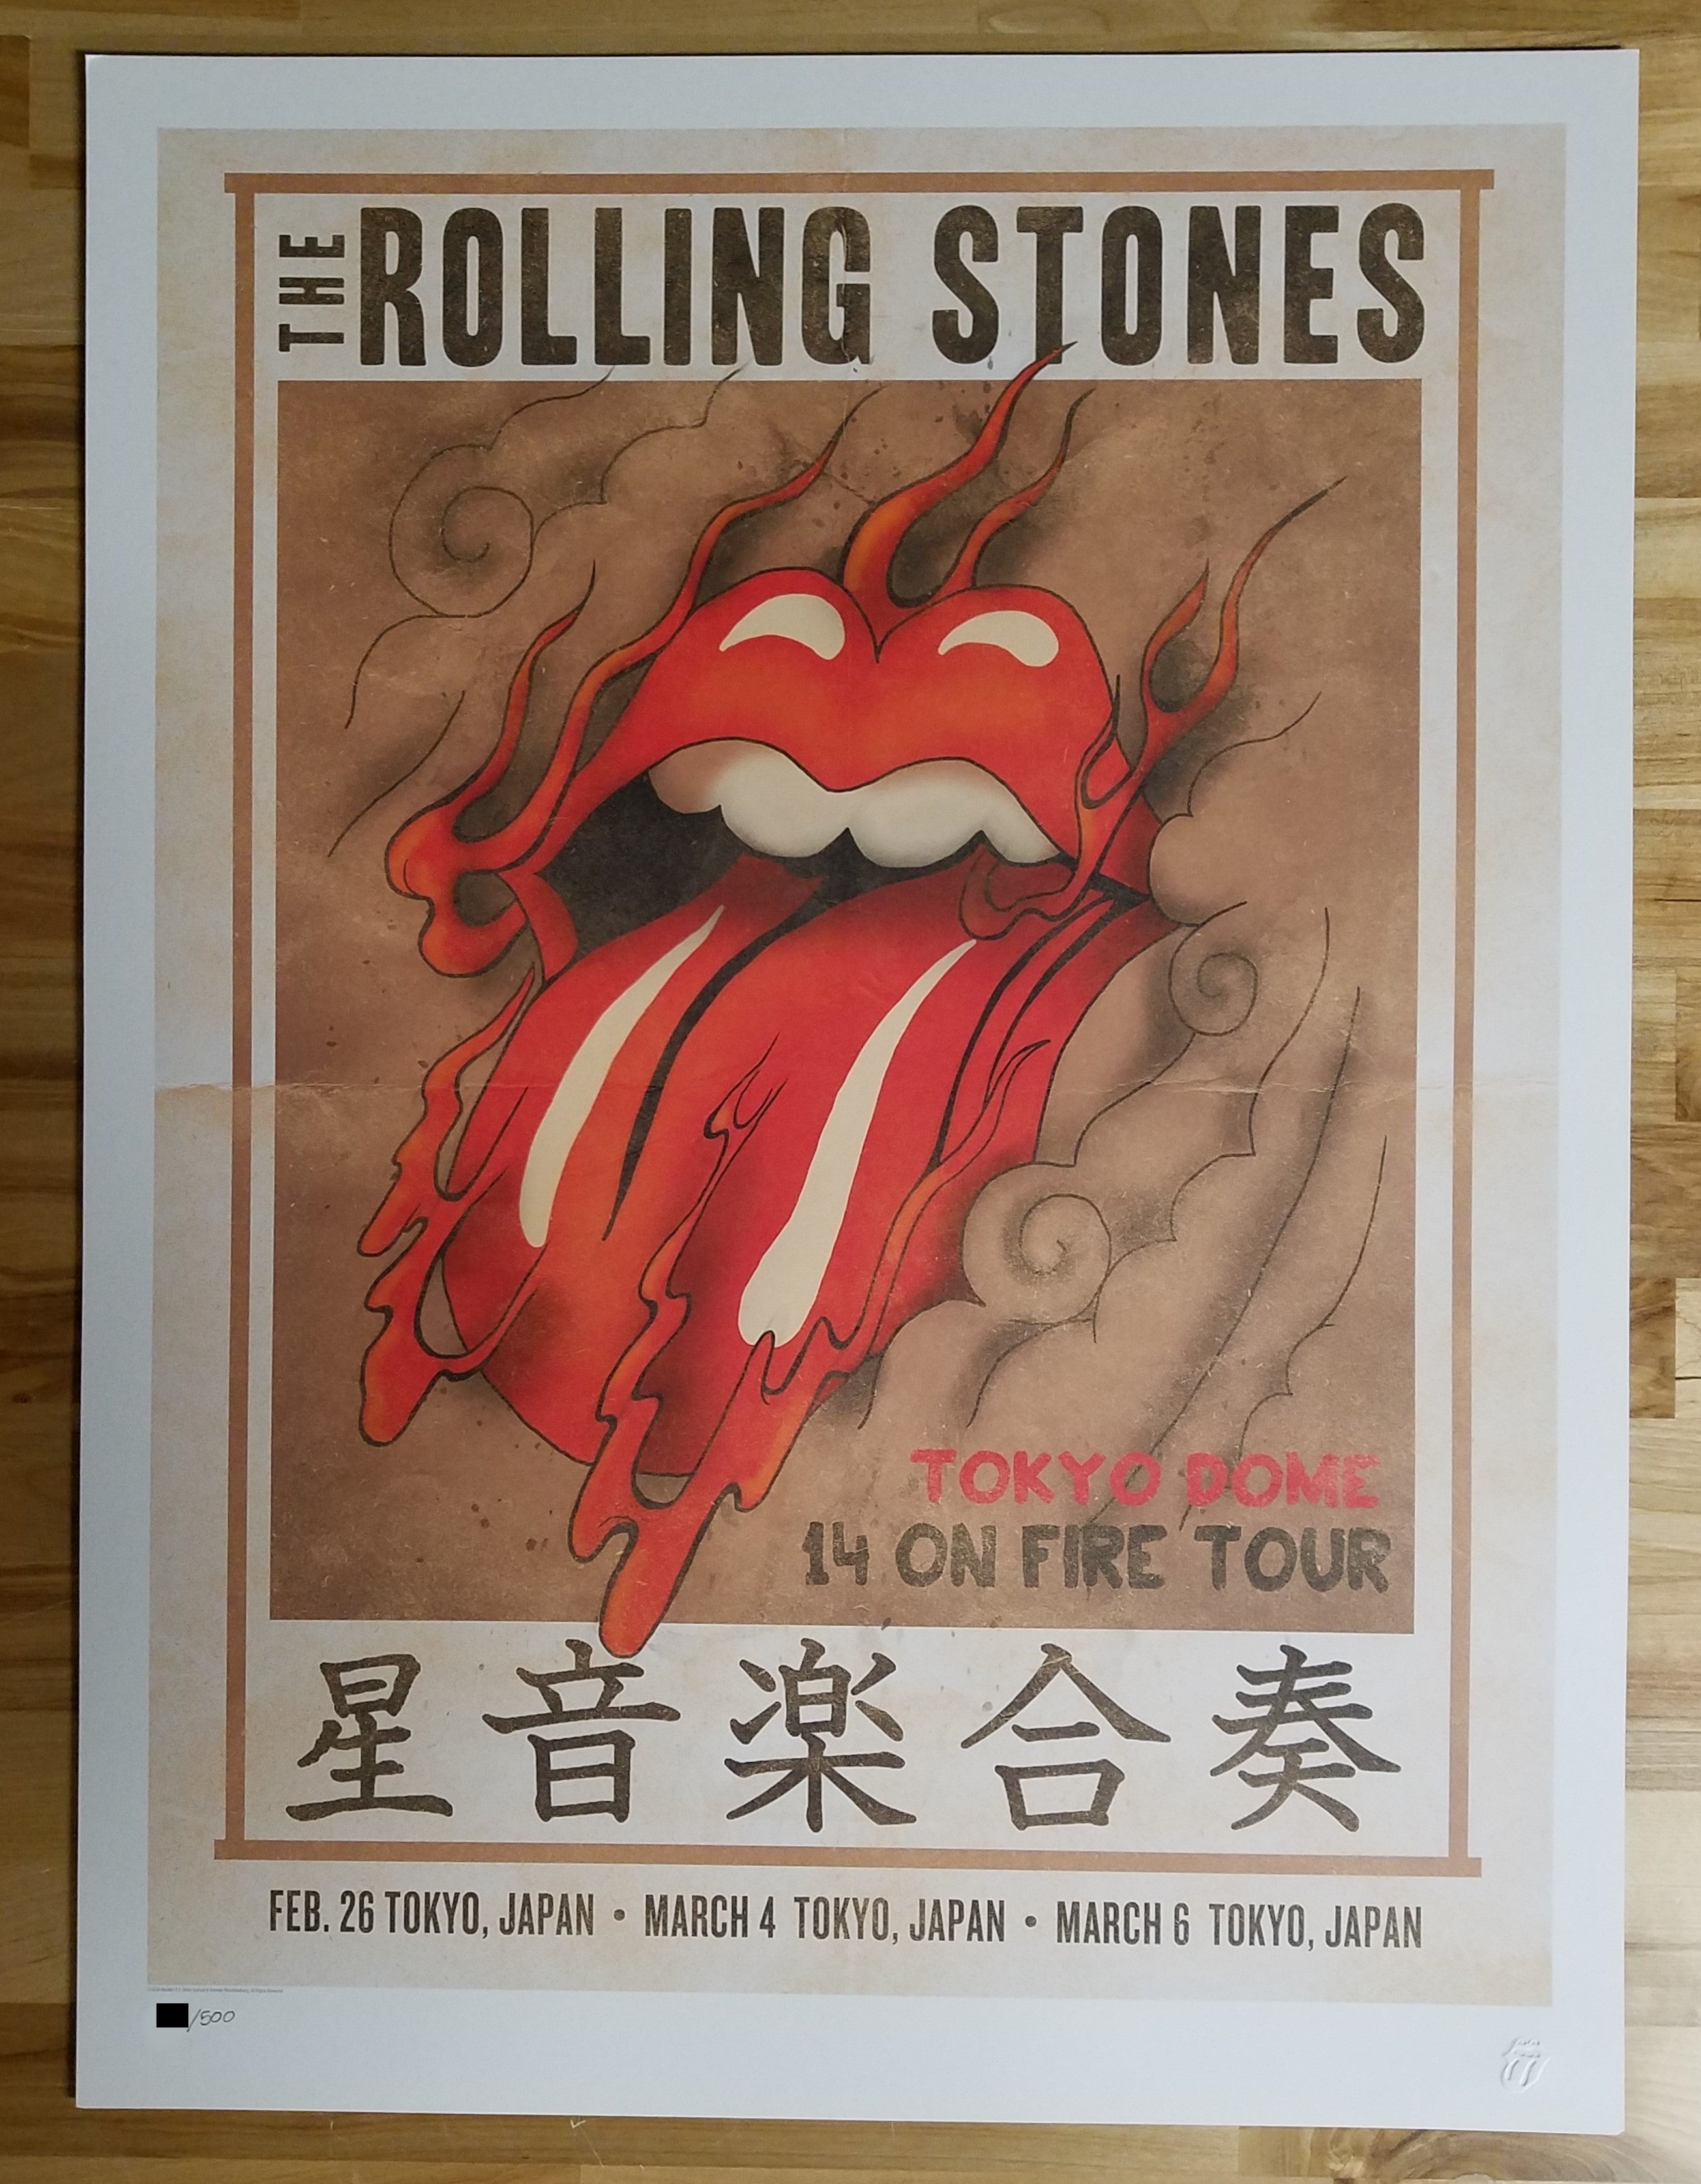 Title: Rolling Stones   Poster artist:   Edition:  xx/500  Type: Limited edition lithograph   Size: 17" x 23"  Location: Tokyo, Japan   Venue: Tokyo Dome   Notes:  1st edition, official poster hand numbered and embossed.  Official poster, Asia14 On Fire Tour original from the show!